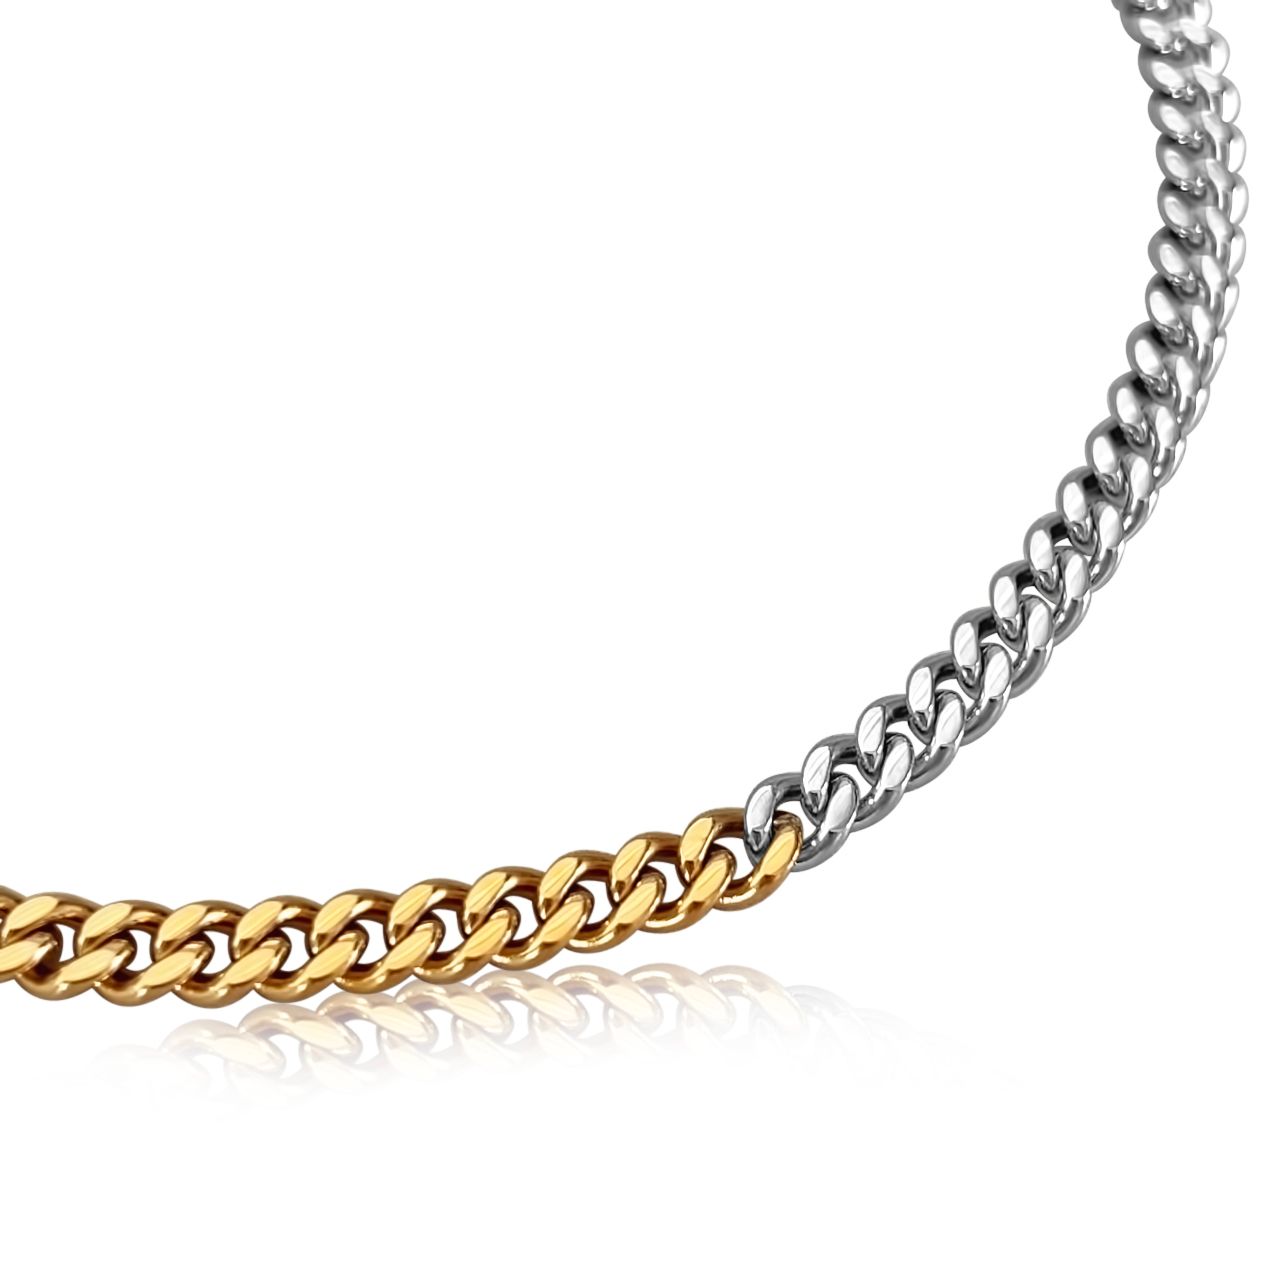 Tips for Wearing a Cuban Chain Necklace to Formal Events